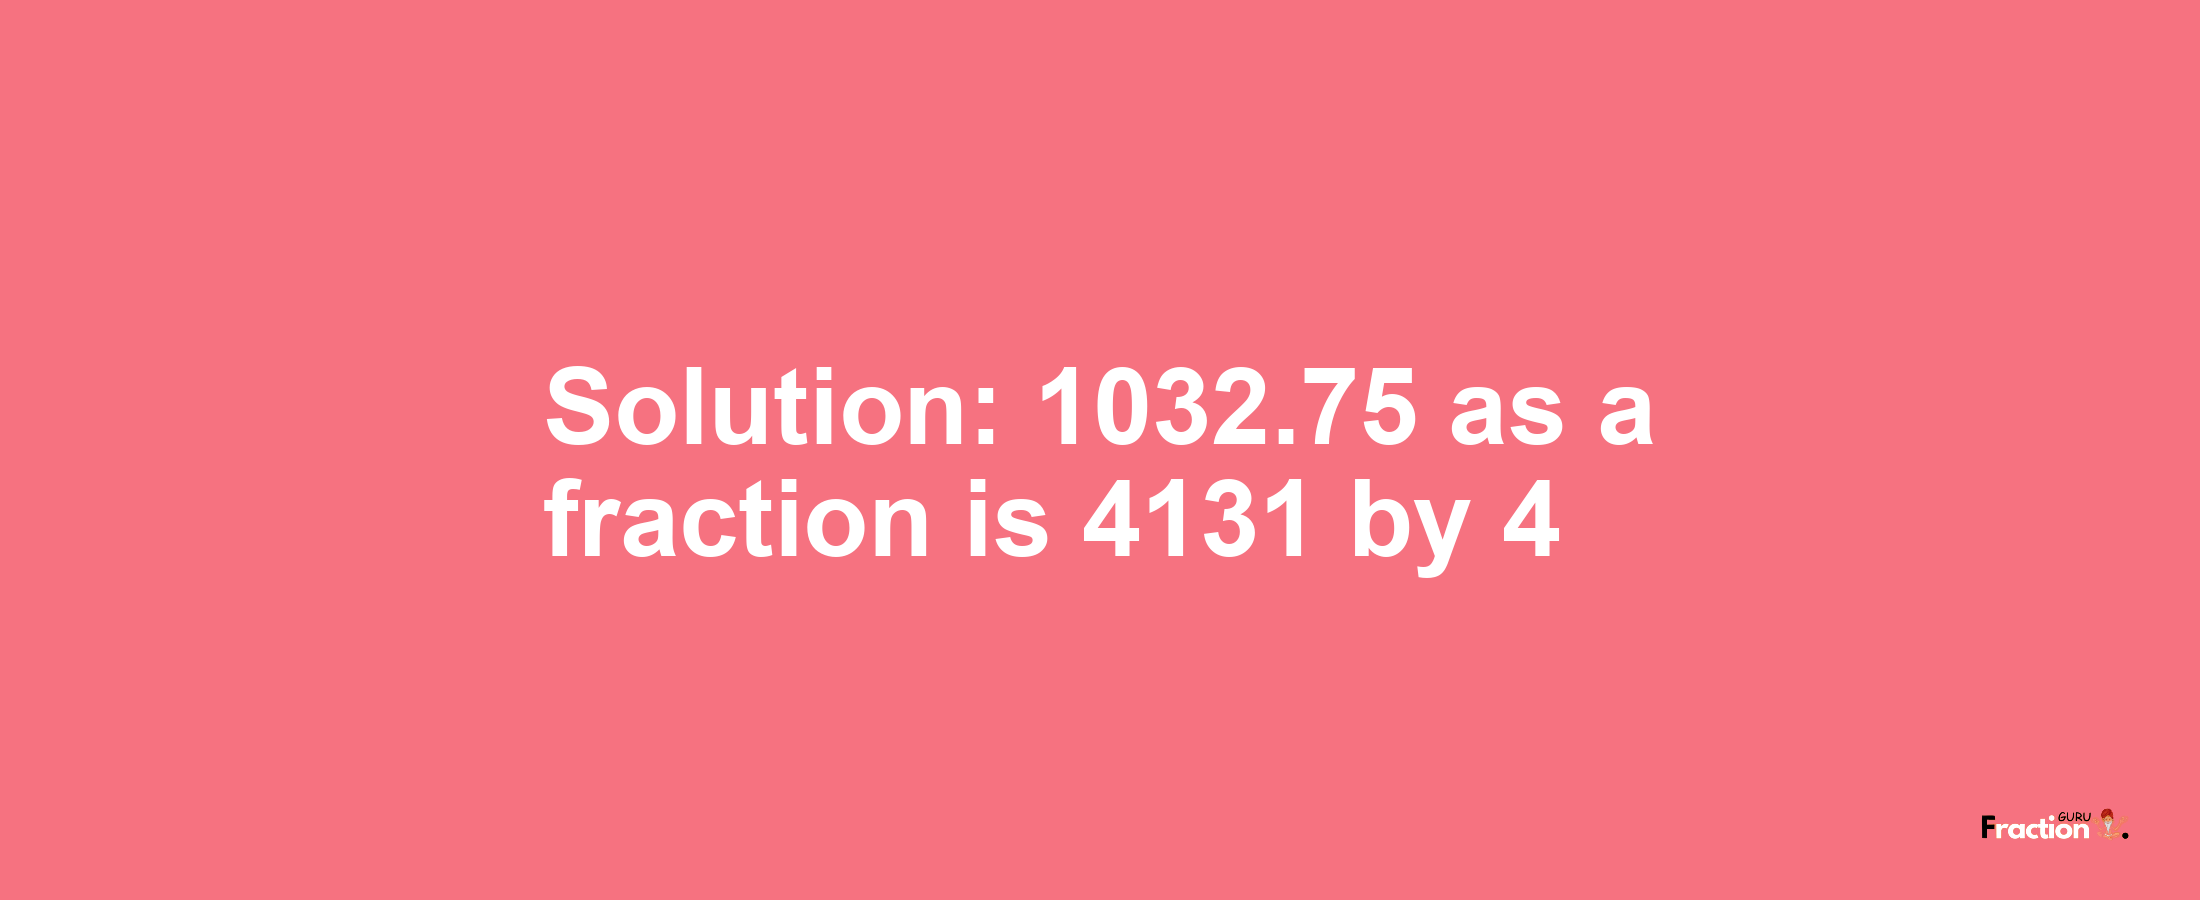 Solution:1032.75 as a fraction is 4131/4